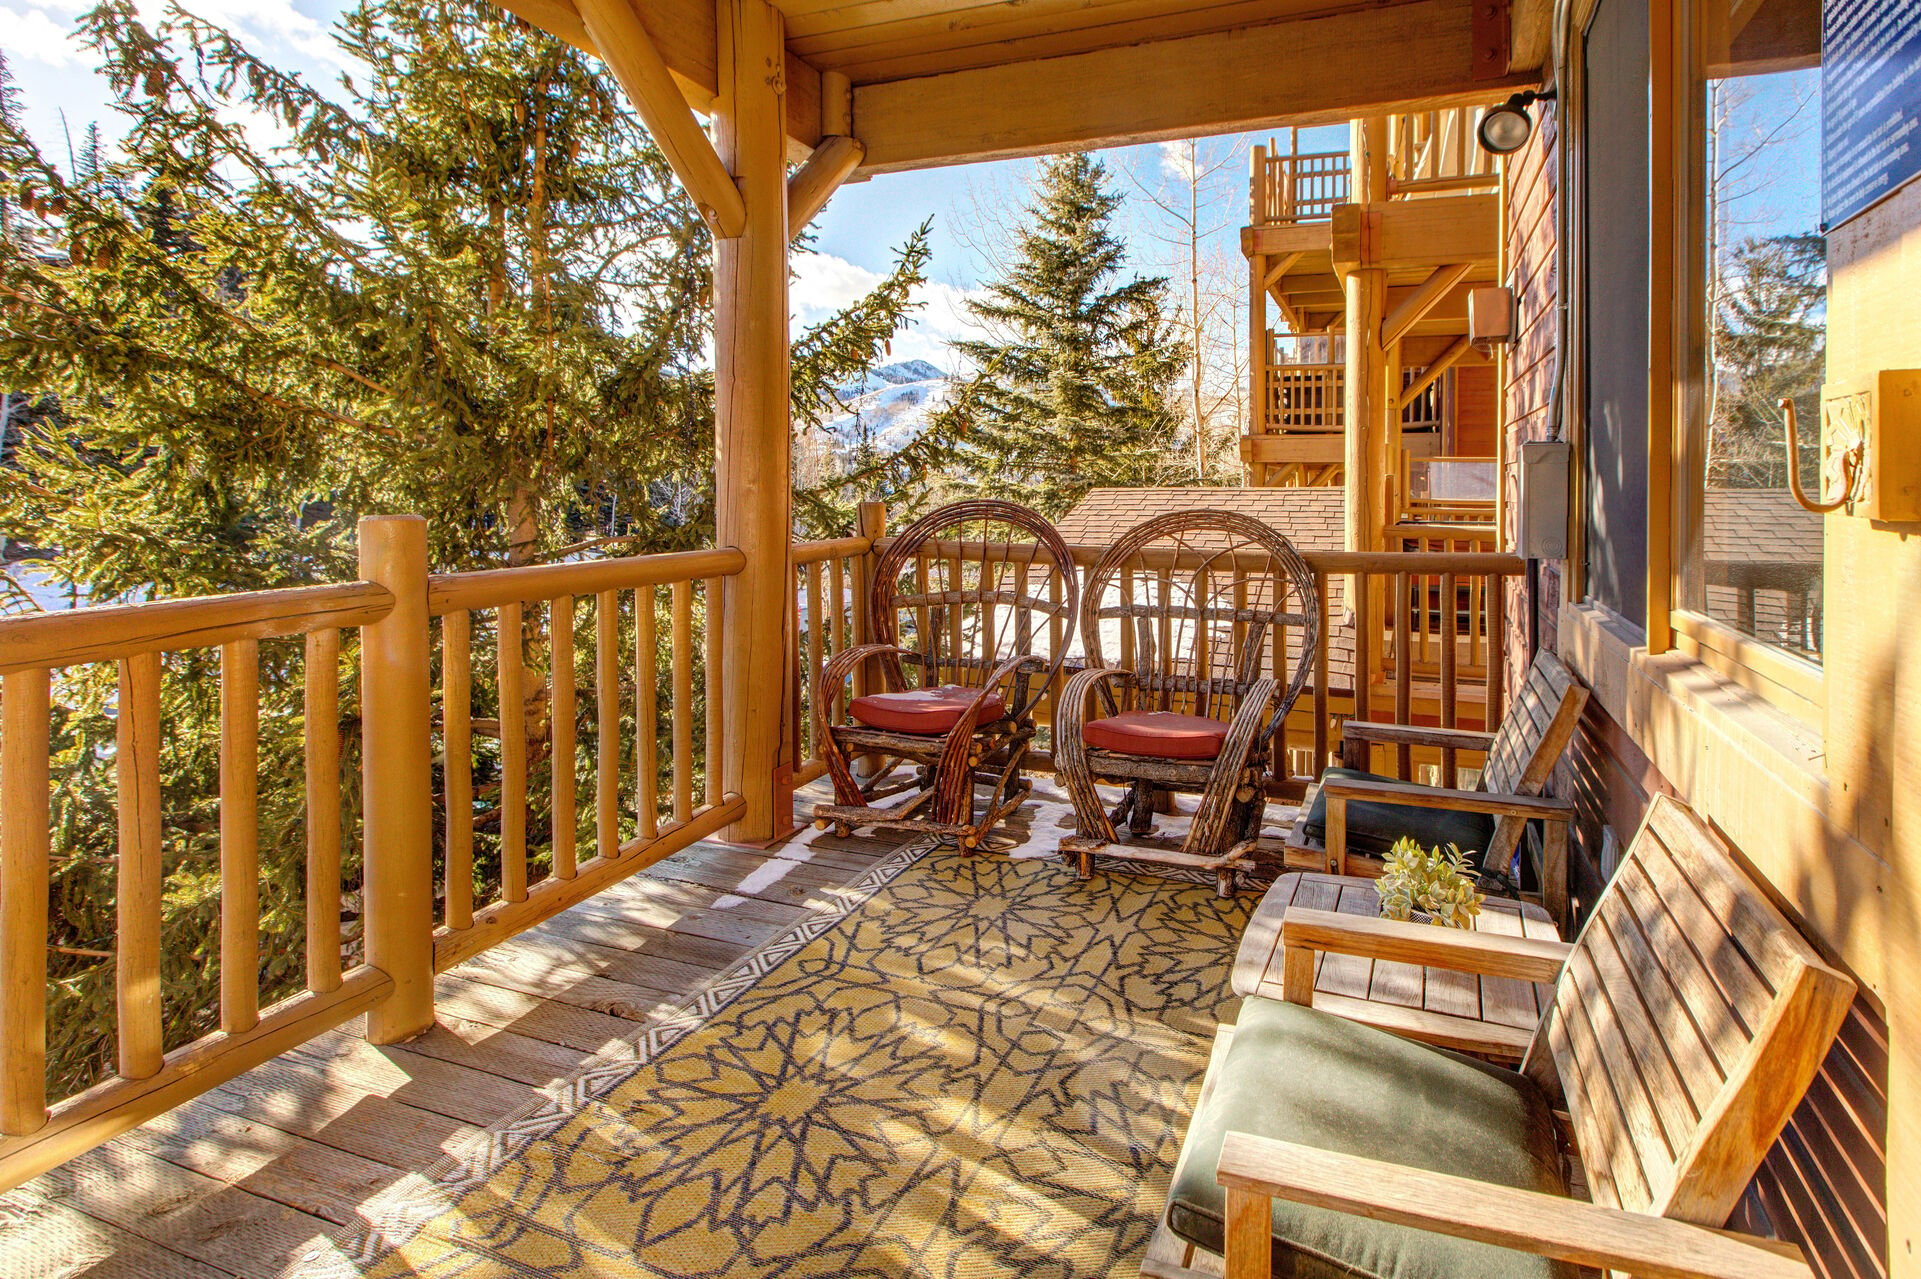 Private Patio located off Living Room with private hot tub, seating for four, and breathtaking views of the surrounding area